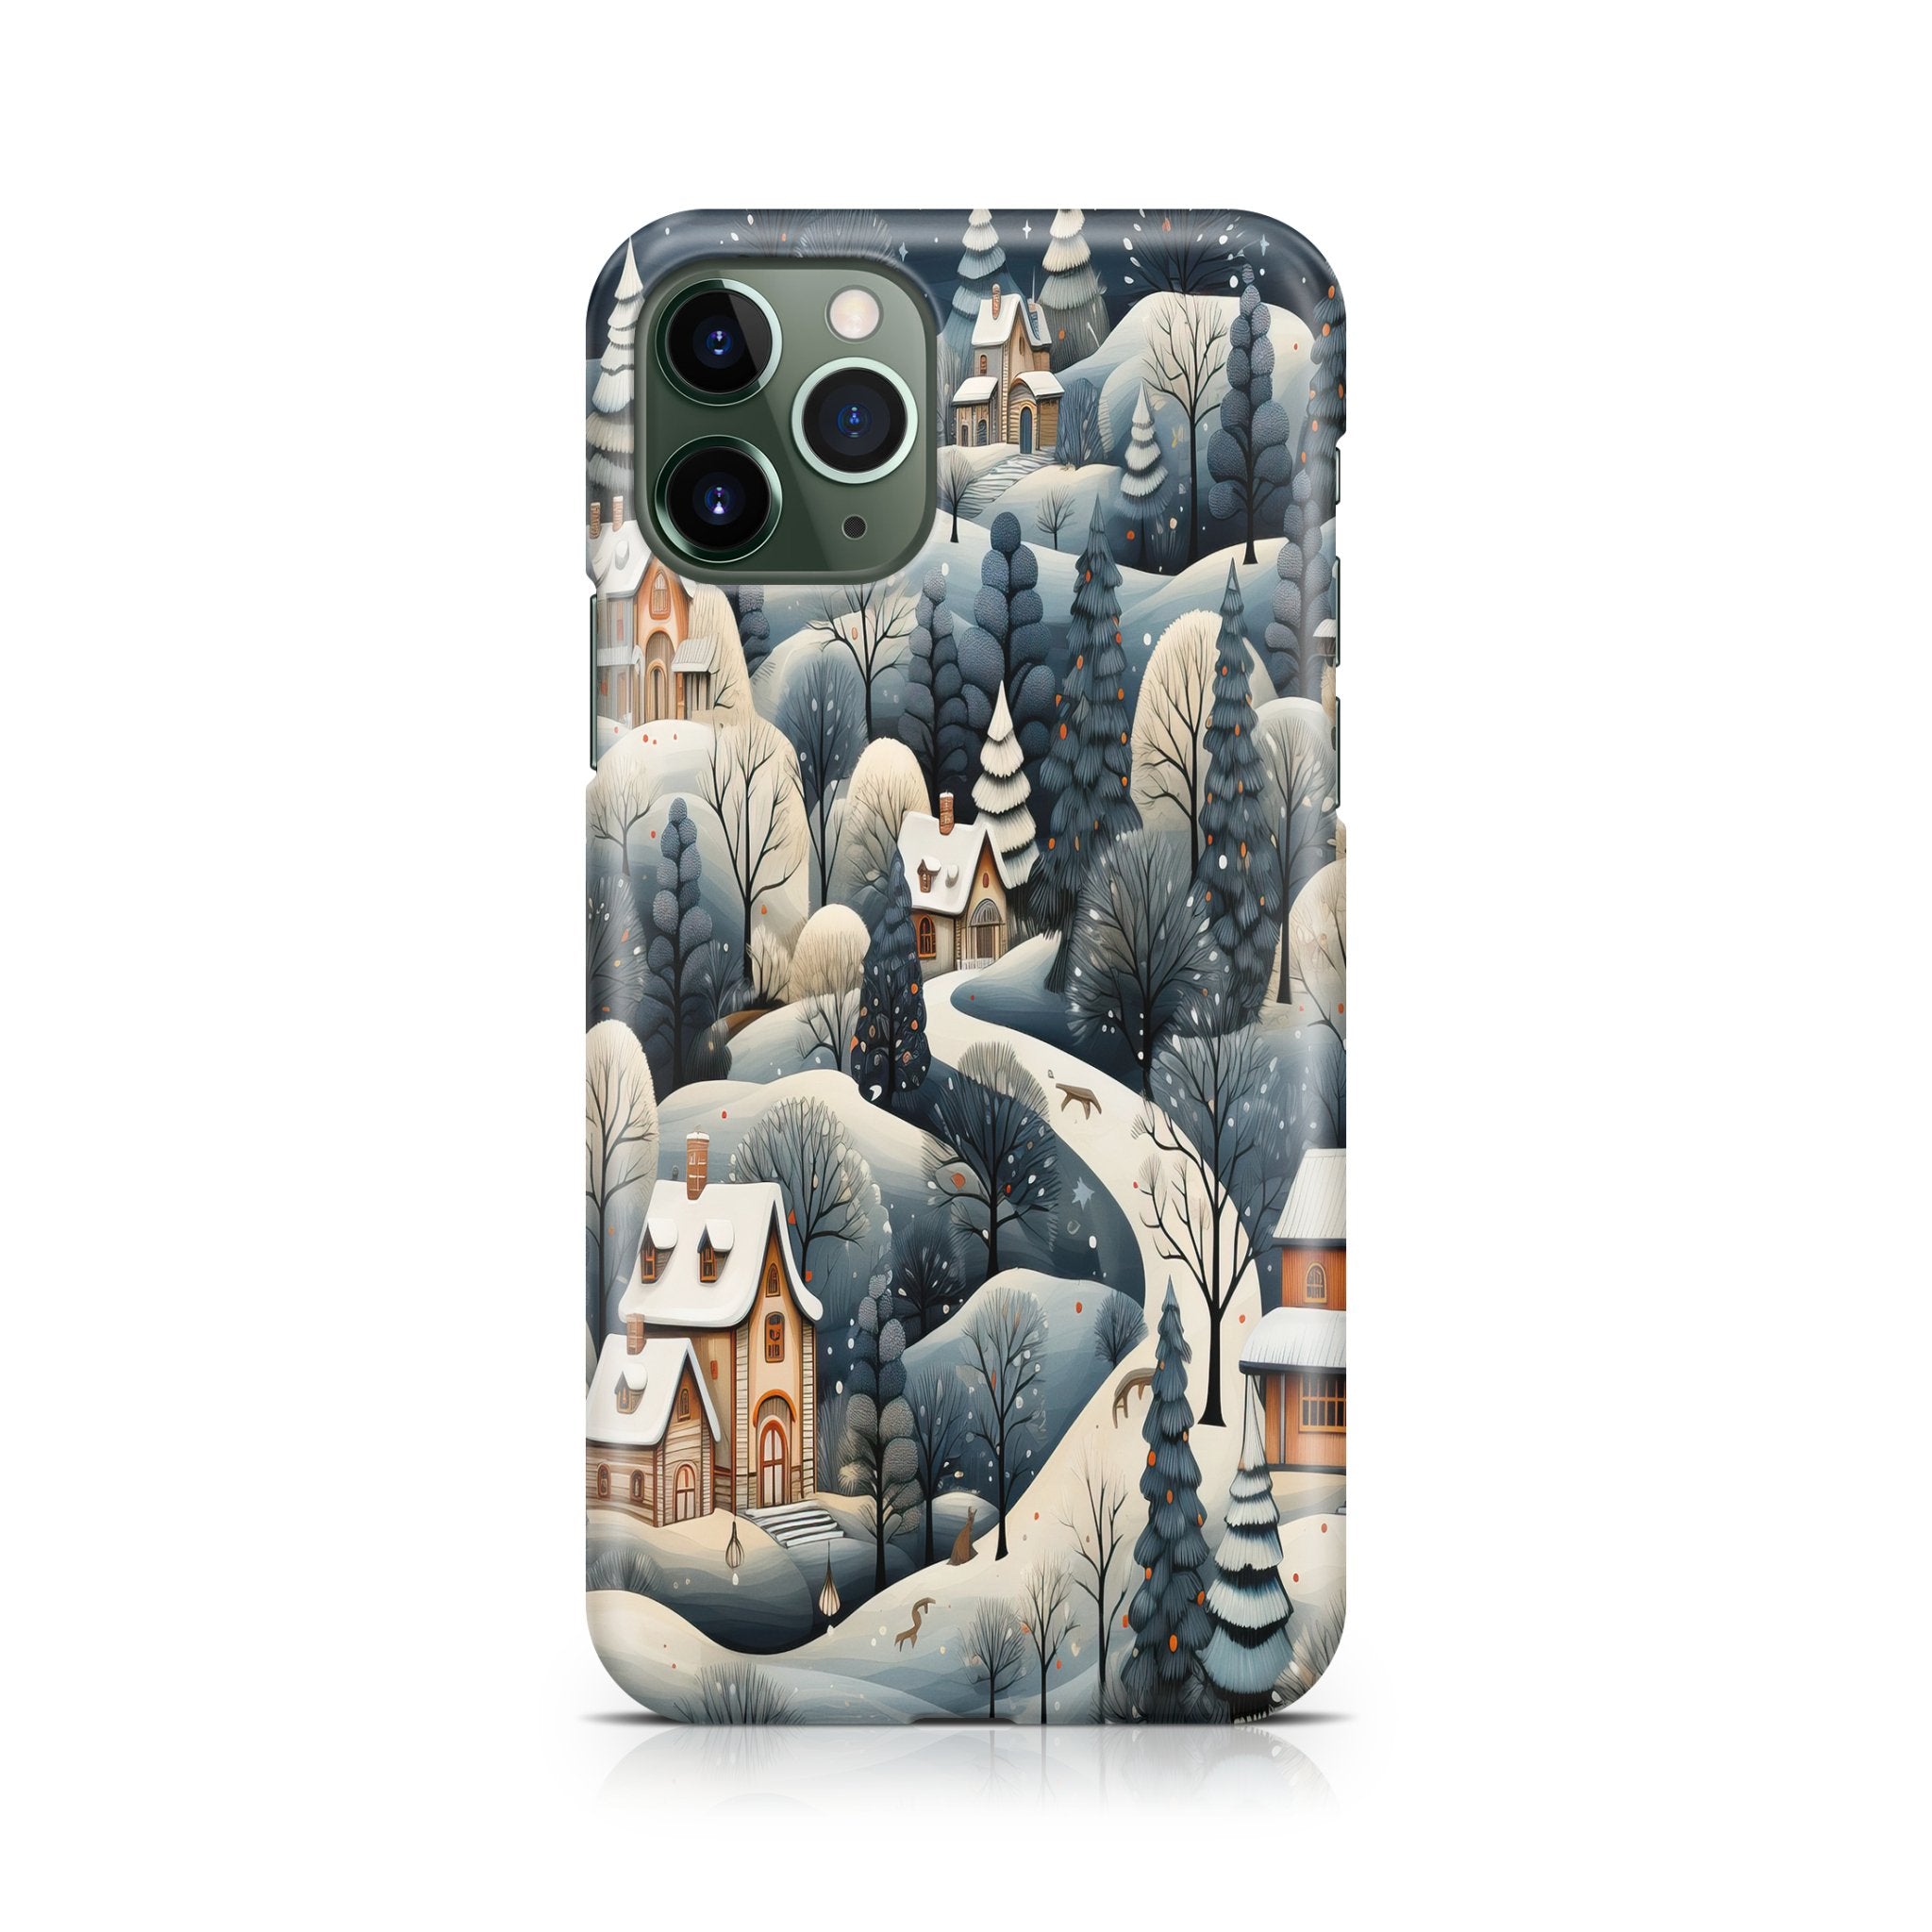 Winter Solstice - iPhone phone case designs by CaseSwagger